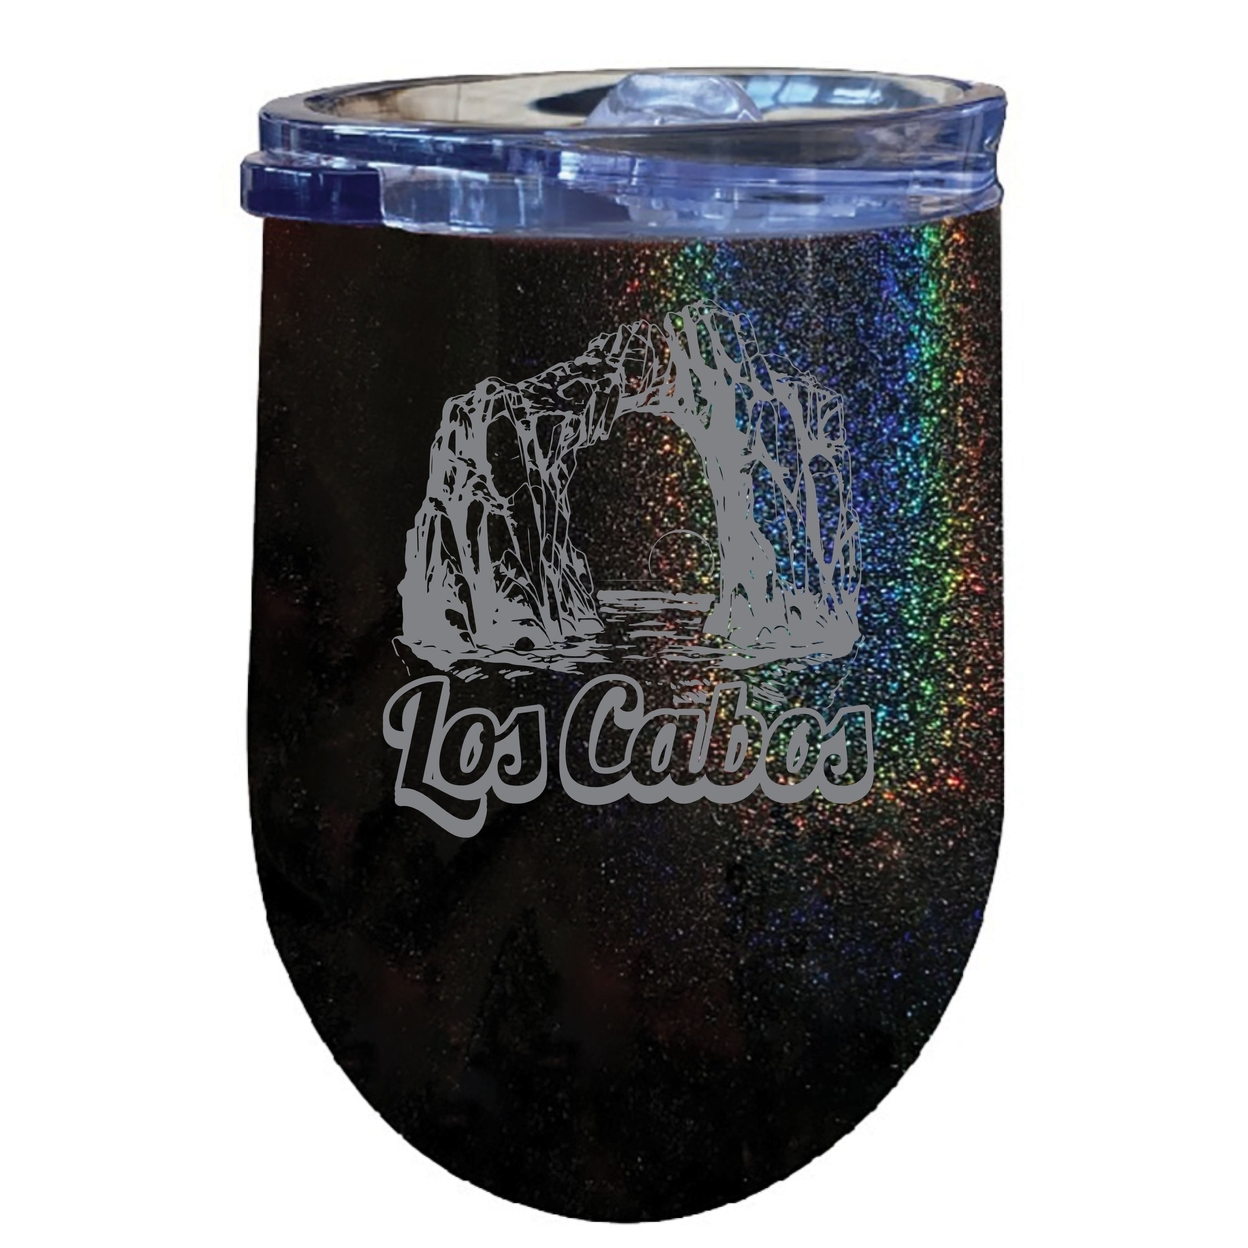 Los Cabos Mexico Souvenir 12 Oz Engraved Insulated Wine Stainless Steel Tumbler - Rainbow Glitter Gray,,Single Unit